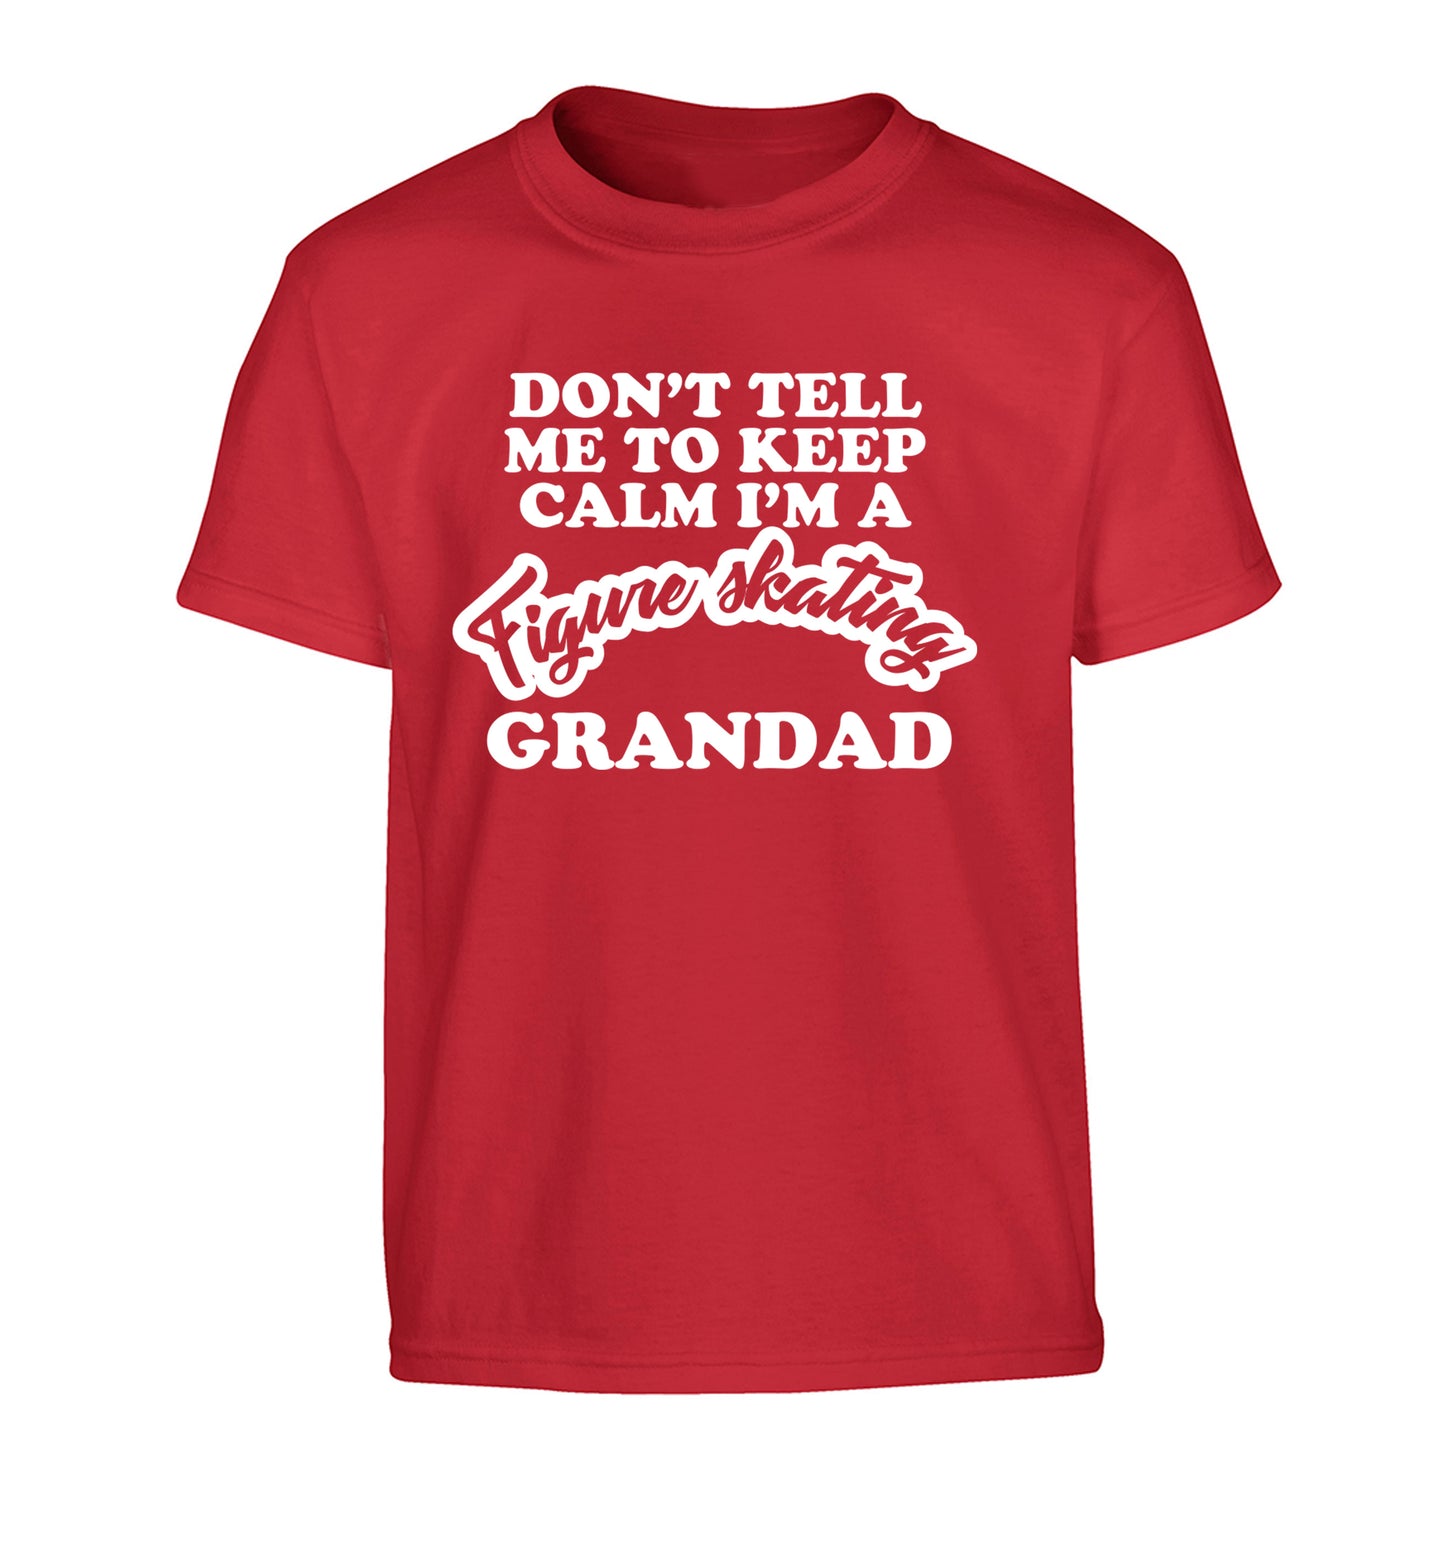 Don't tell me to keep calm I'm a figure skating grandad Children's red Tshirt 12-14 Years